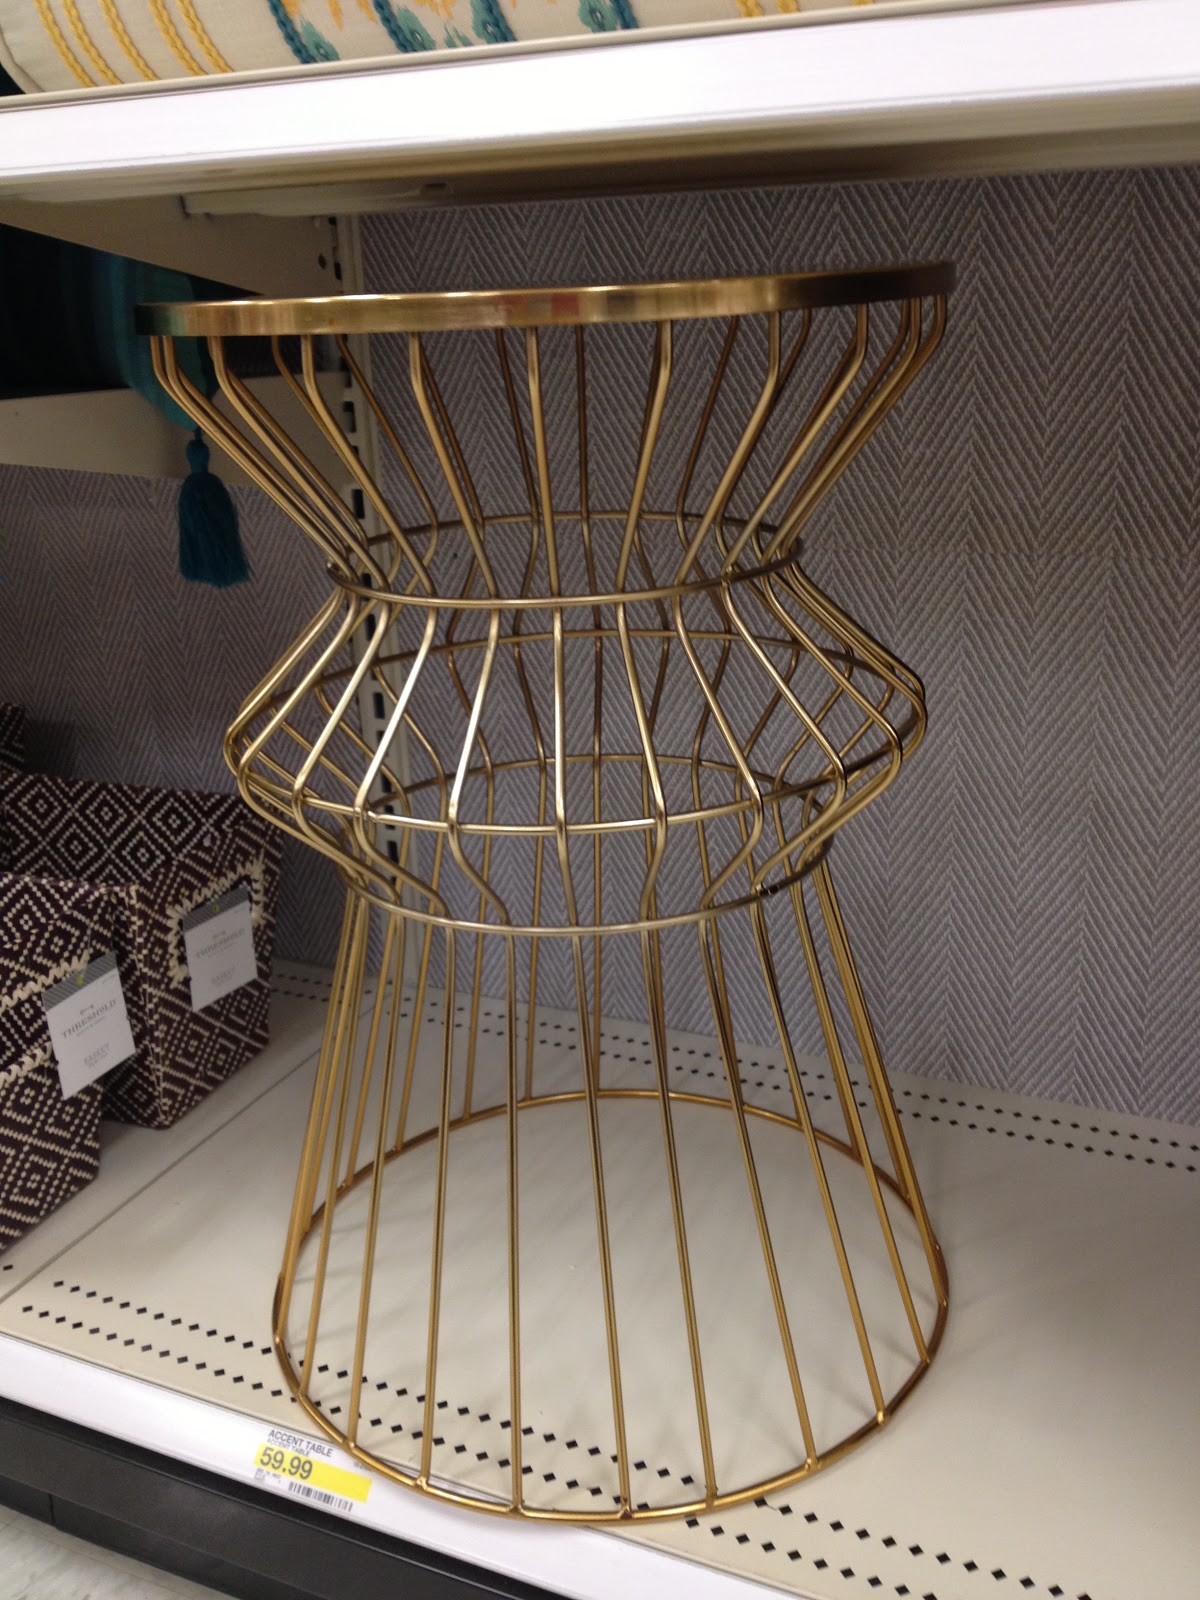 target gold side table loris decoration img accent project can you love with this wire meant pieces for living room youth drum throne mirrored bedside drawers small round